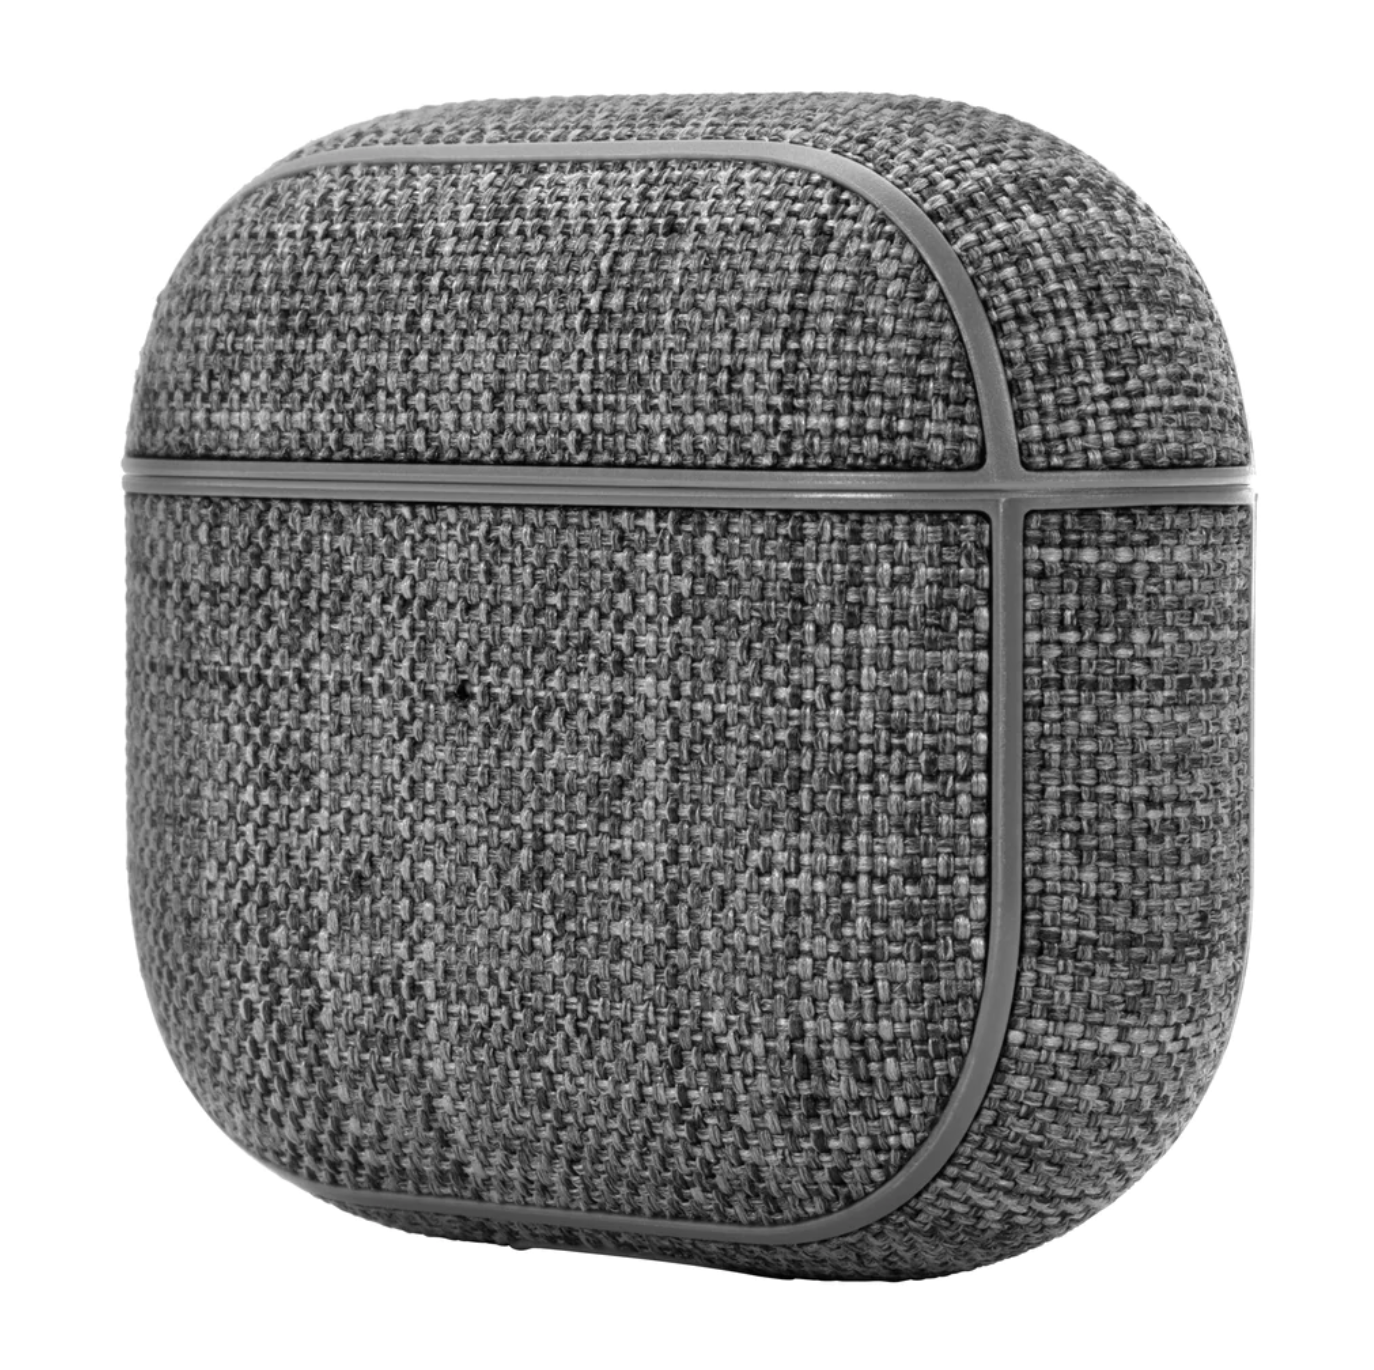 Incase Woolenex Case for AirPods (3rd Generation)